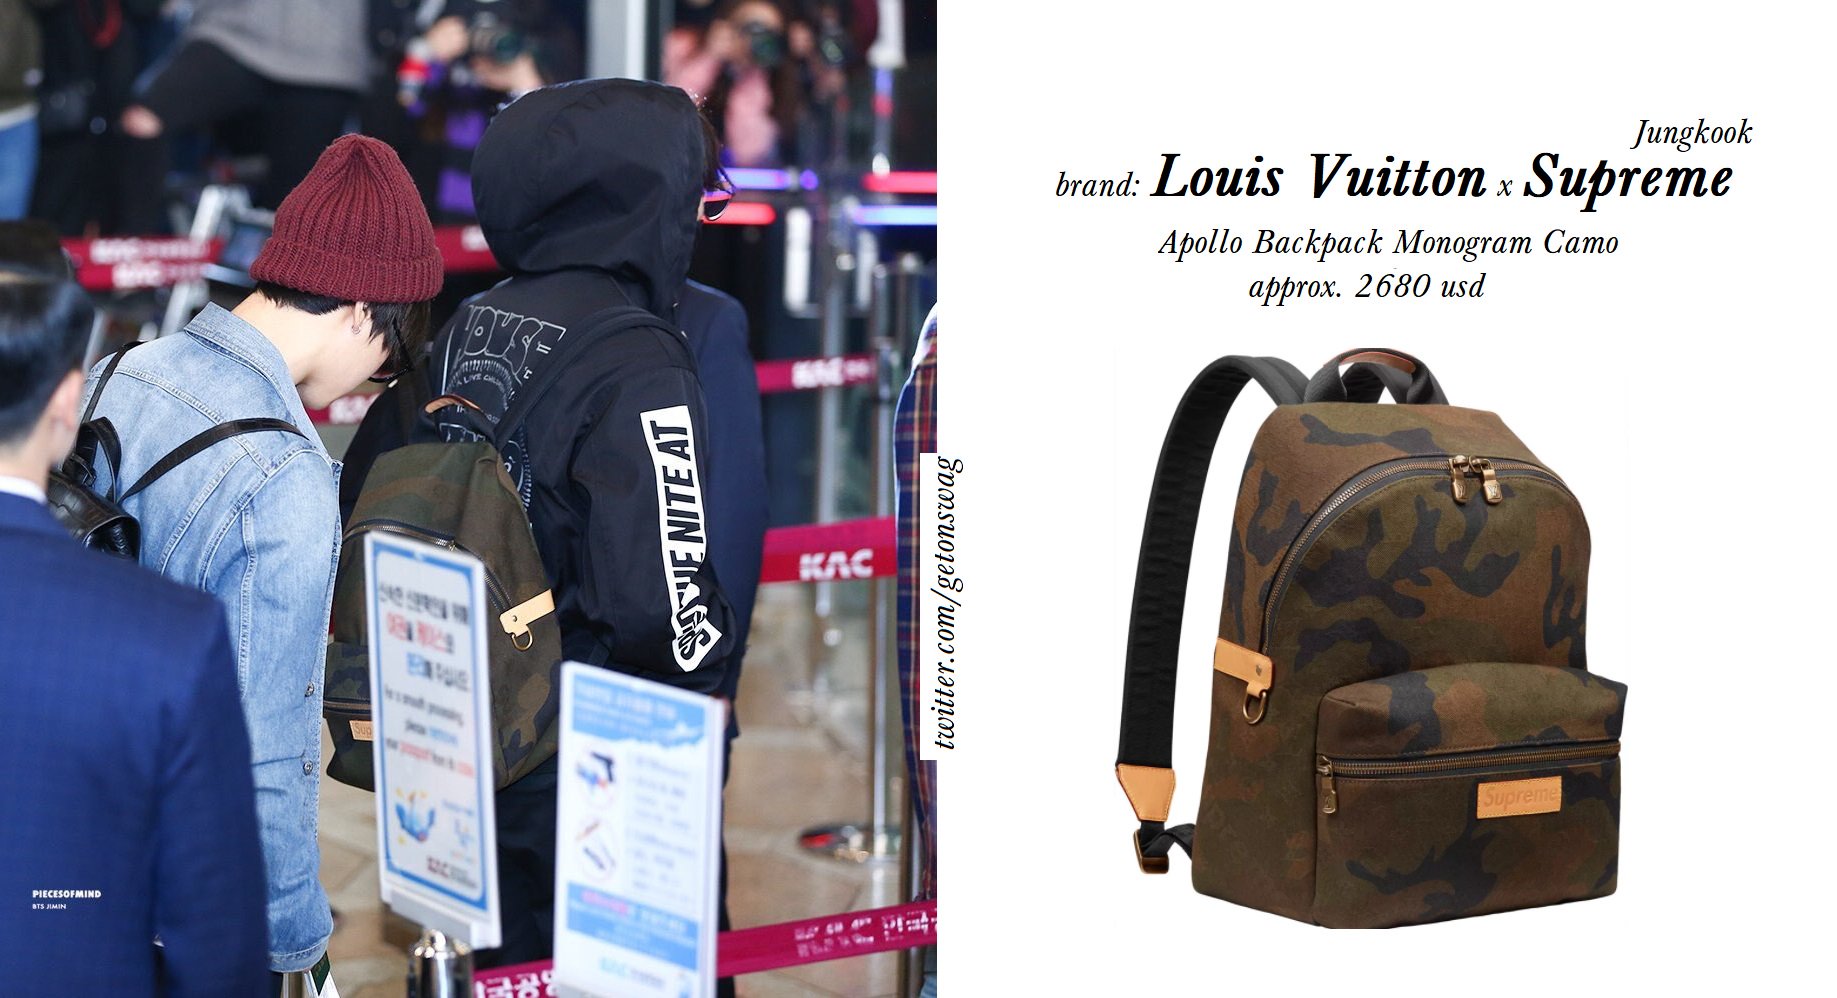 Beyond The Style ✼ Alex ✼ on X: JUNGKOOK #BTS 171020 170922 171023 airport  (requested) #JUNGKOOK #정국 #방탄소년단 PRADA camouflage backpack '2017 (similar),  approx. 1850 usd 🎁  / X